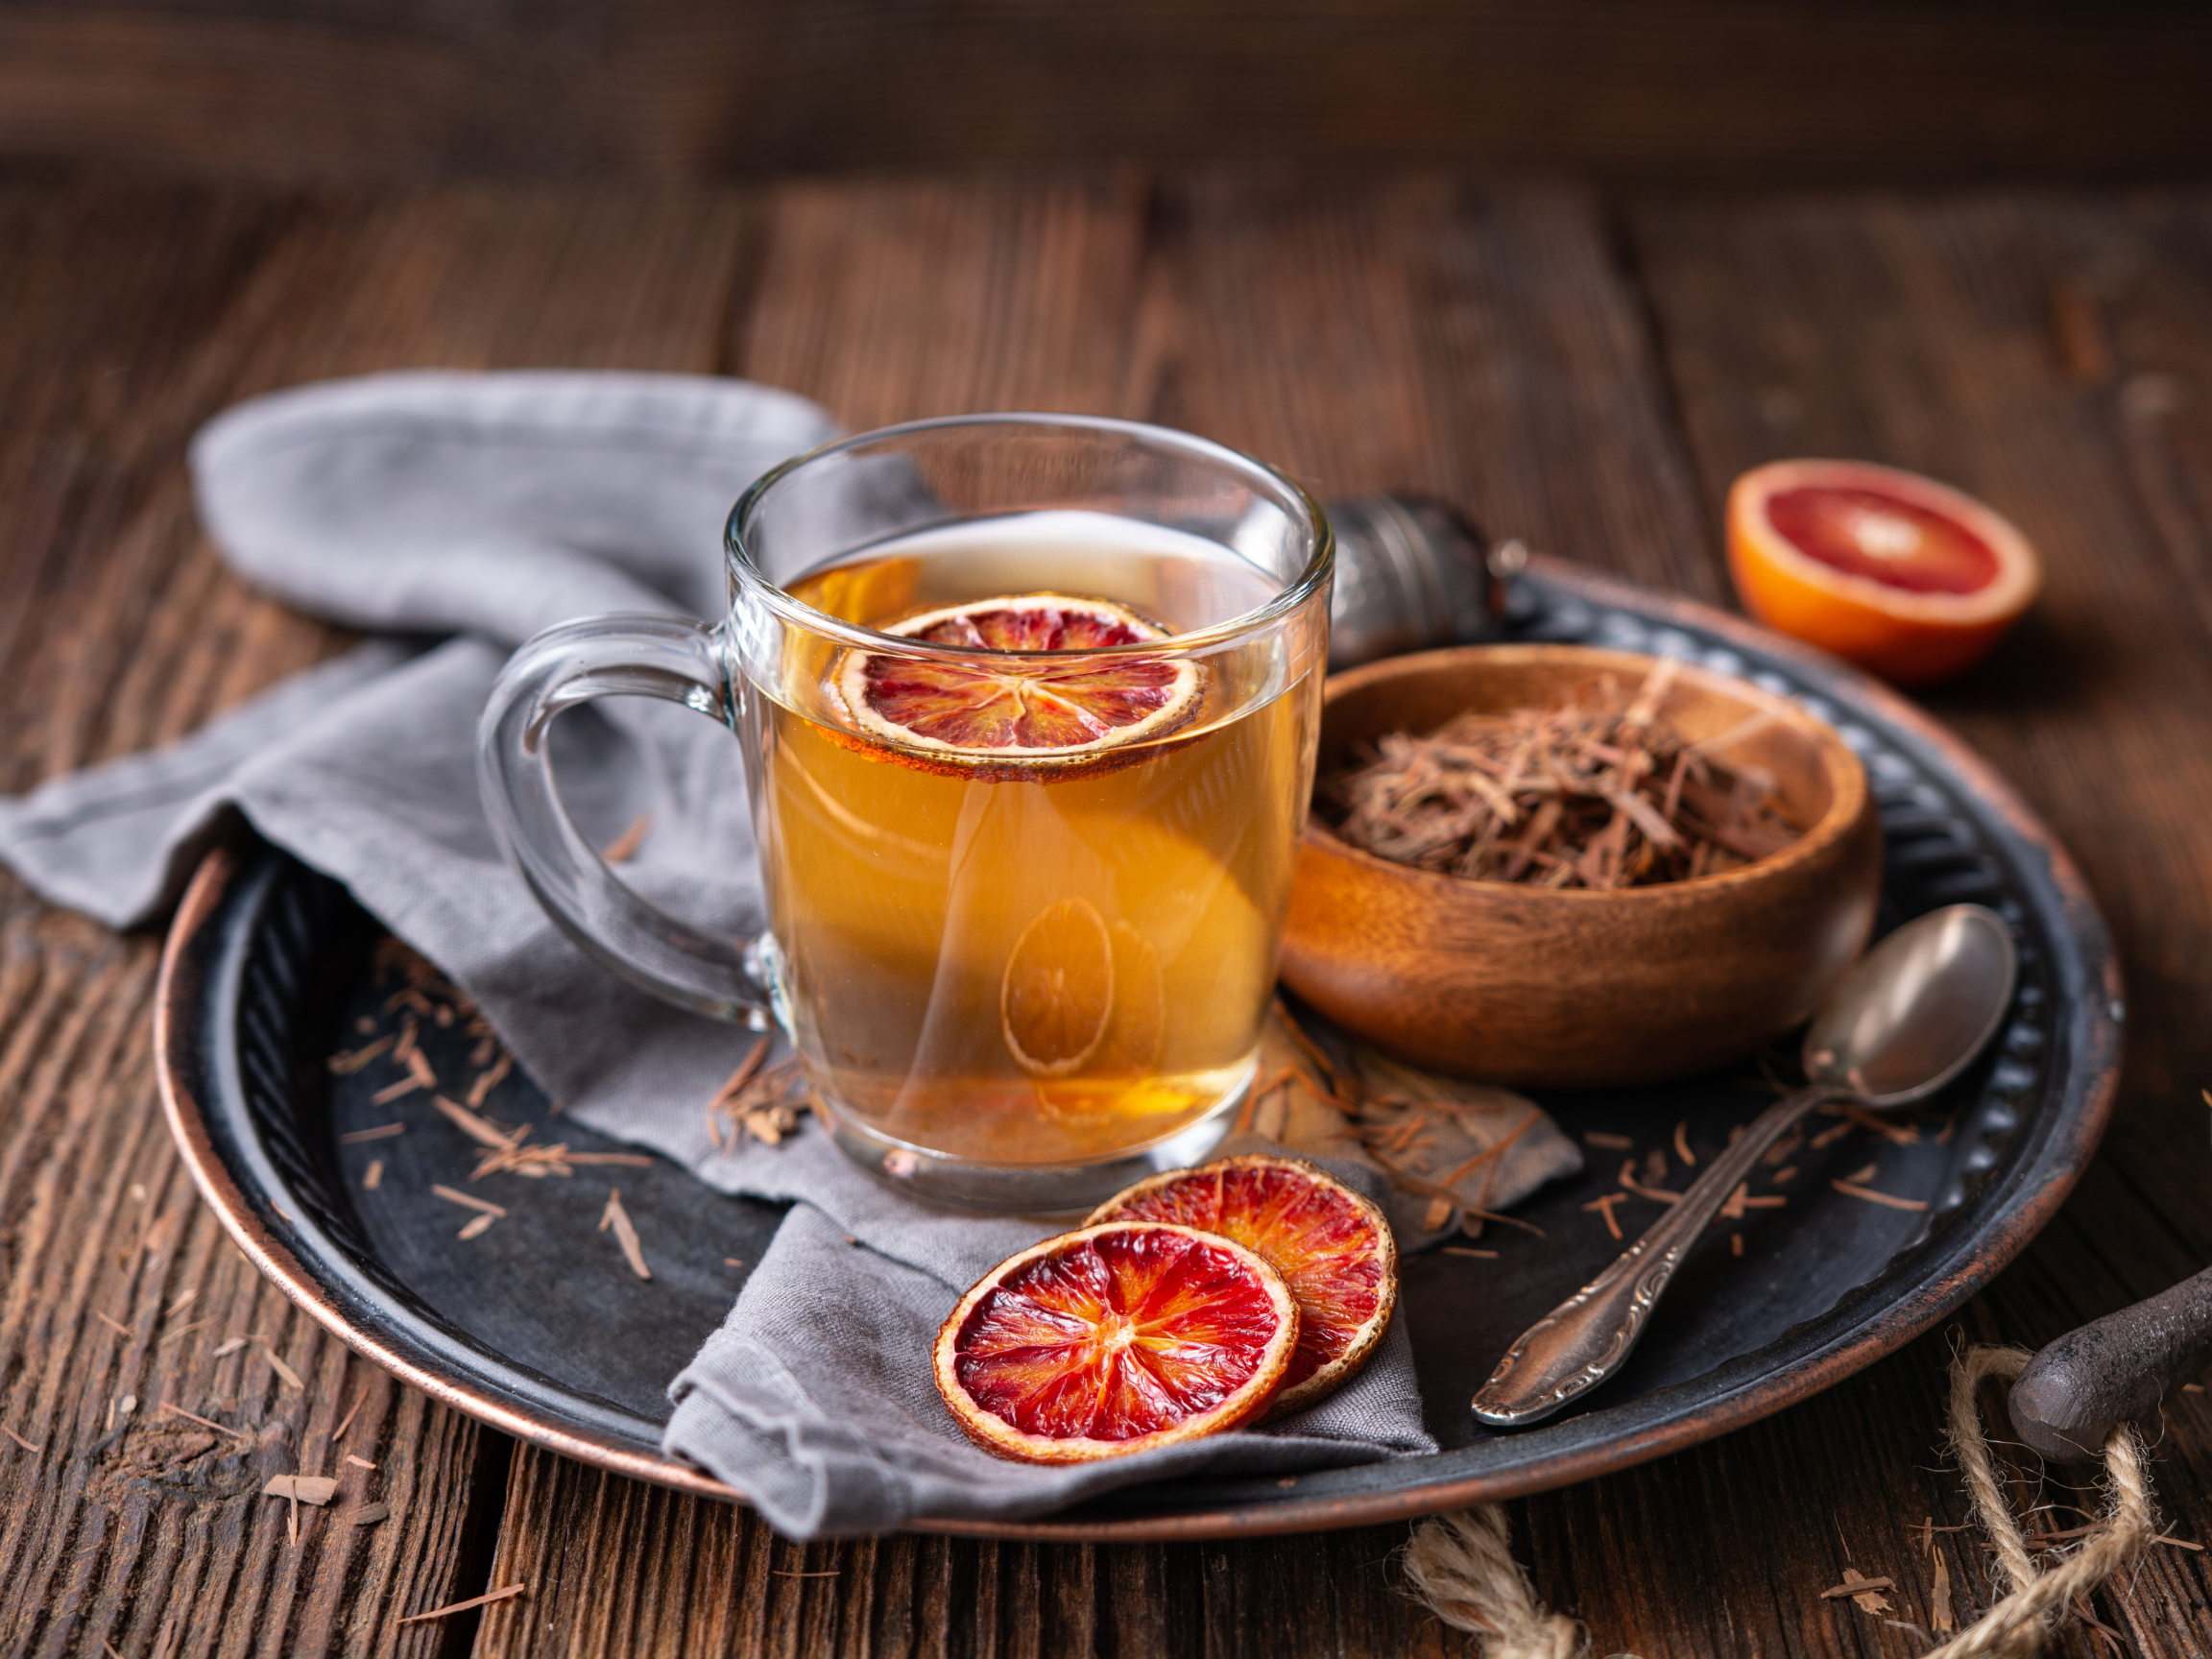 a glass cup filled with medicinal Pau d'Arco bark tea, derived from the lapacho tree, a homeopathic health remedy